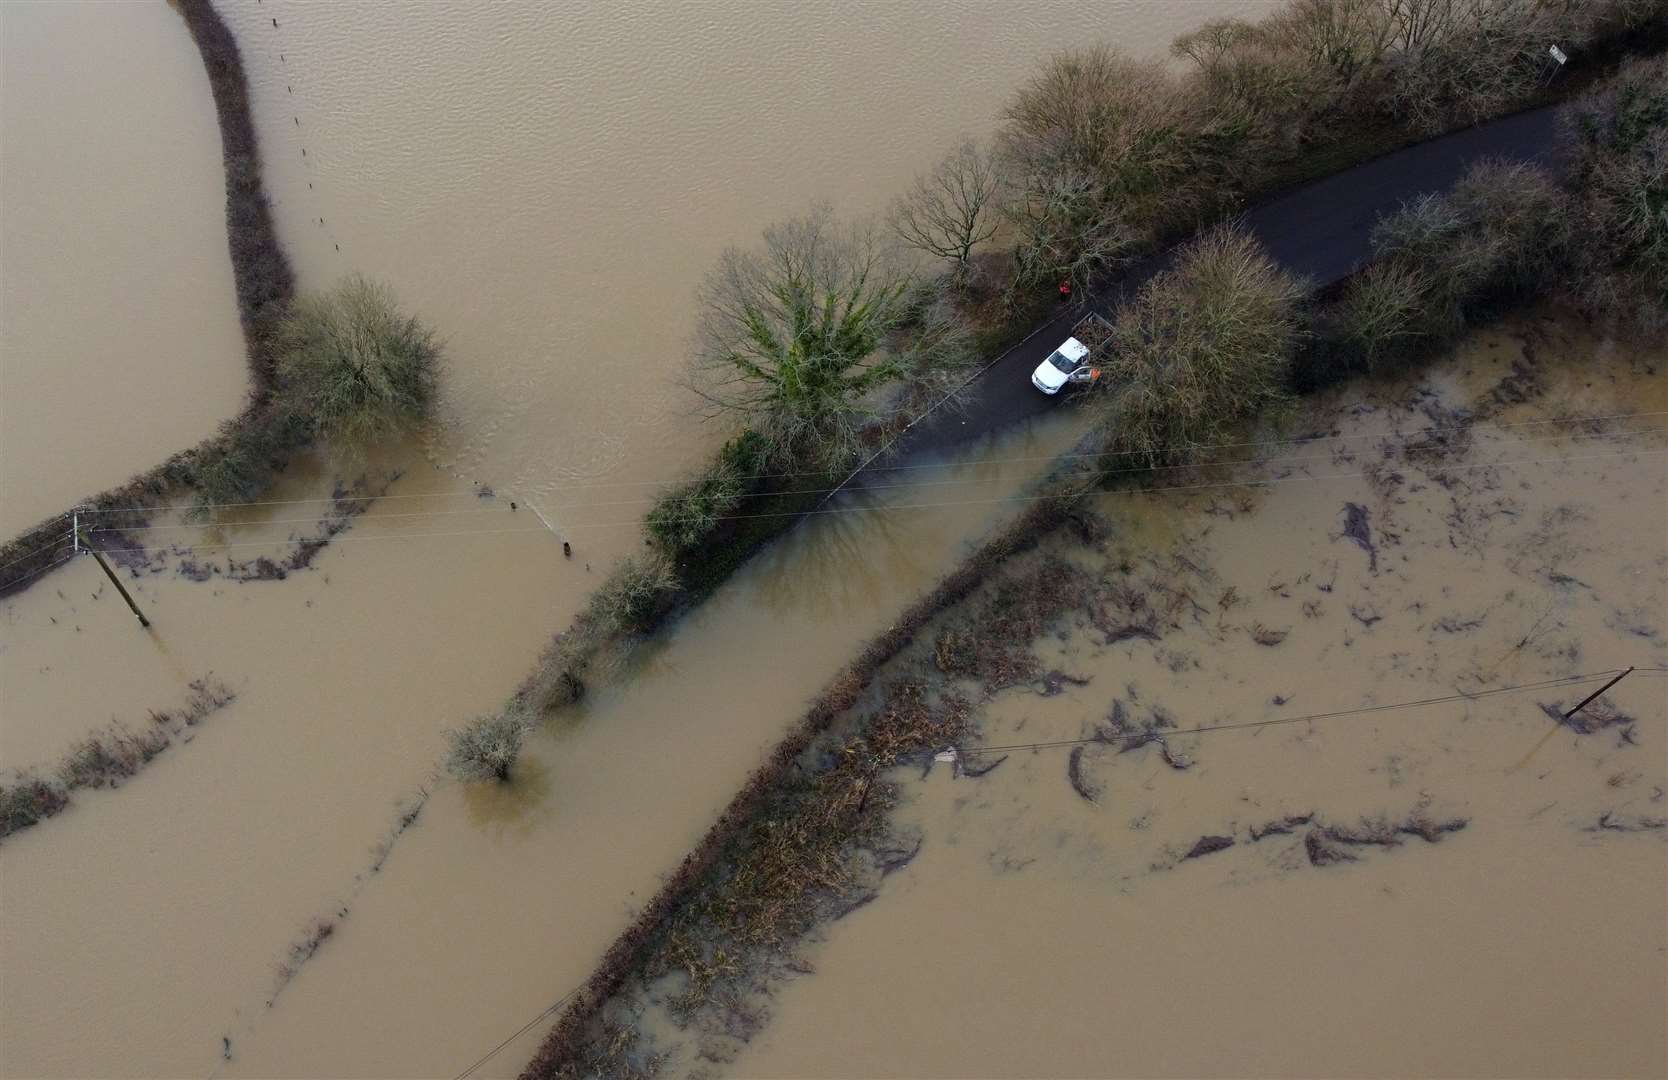 A van avoids floodwater from the River Ouse in Barcombe Mills, East Sussex (Gareth Fuller/PA)